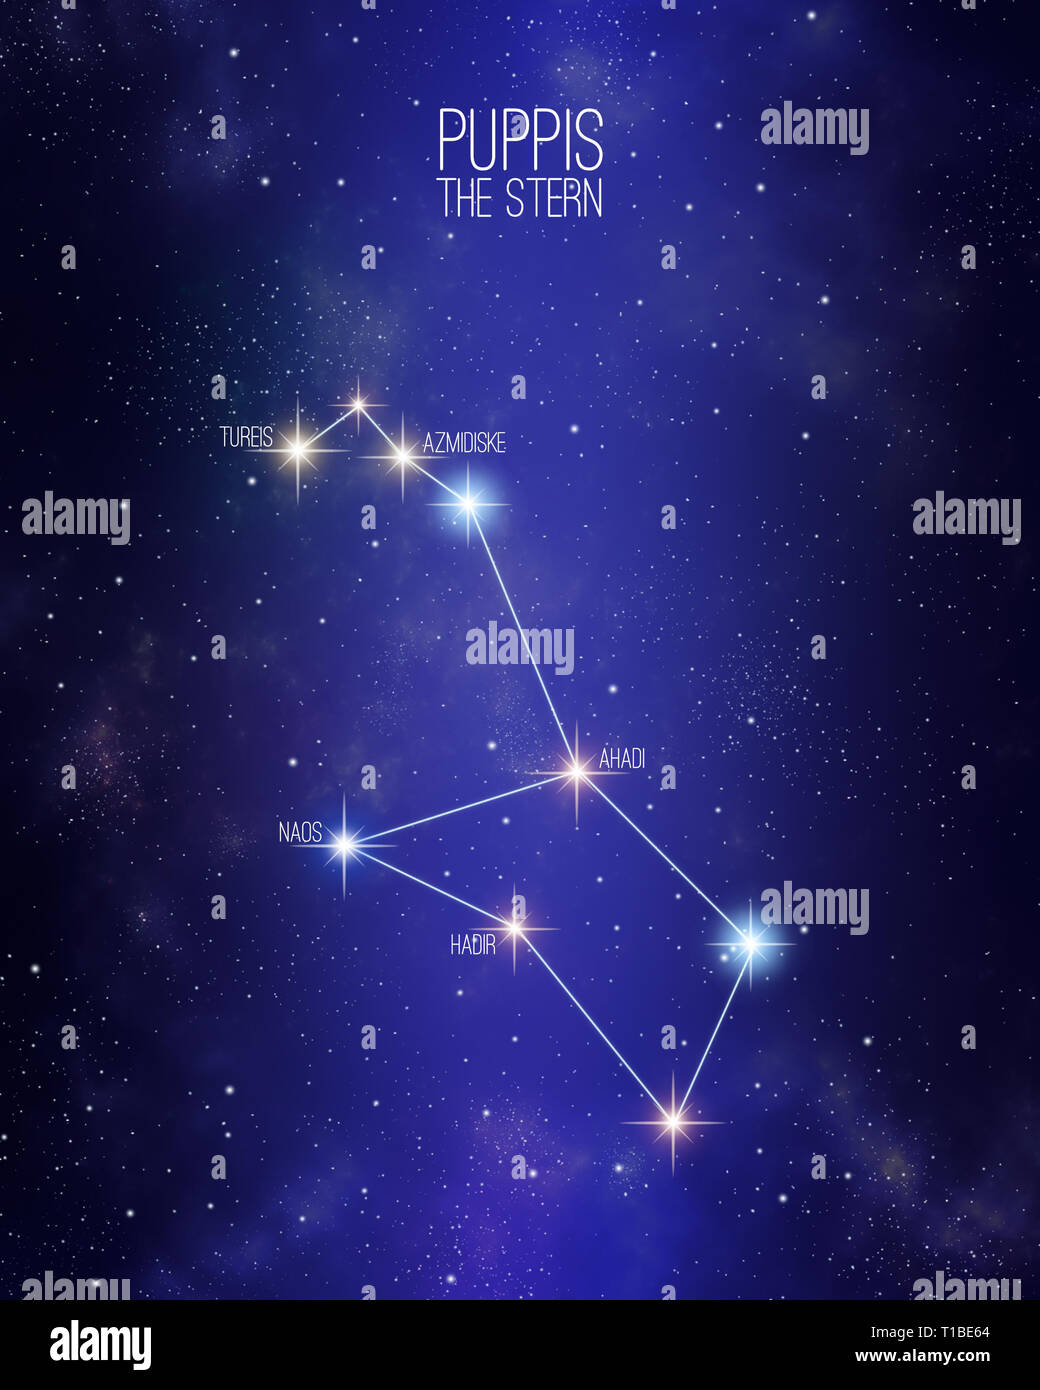 Puppis the stern constellation on a starry space background with the names of its main stars. Relative sizes and different color shades based on the s Stock Photo